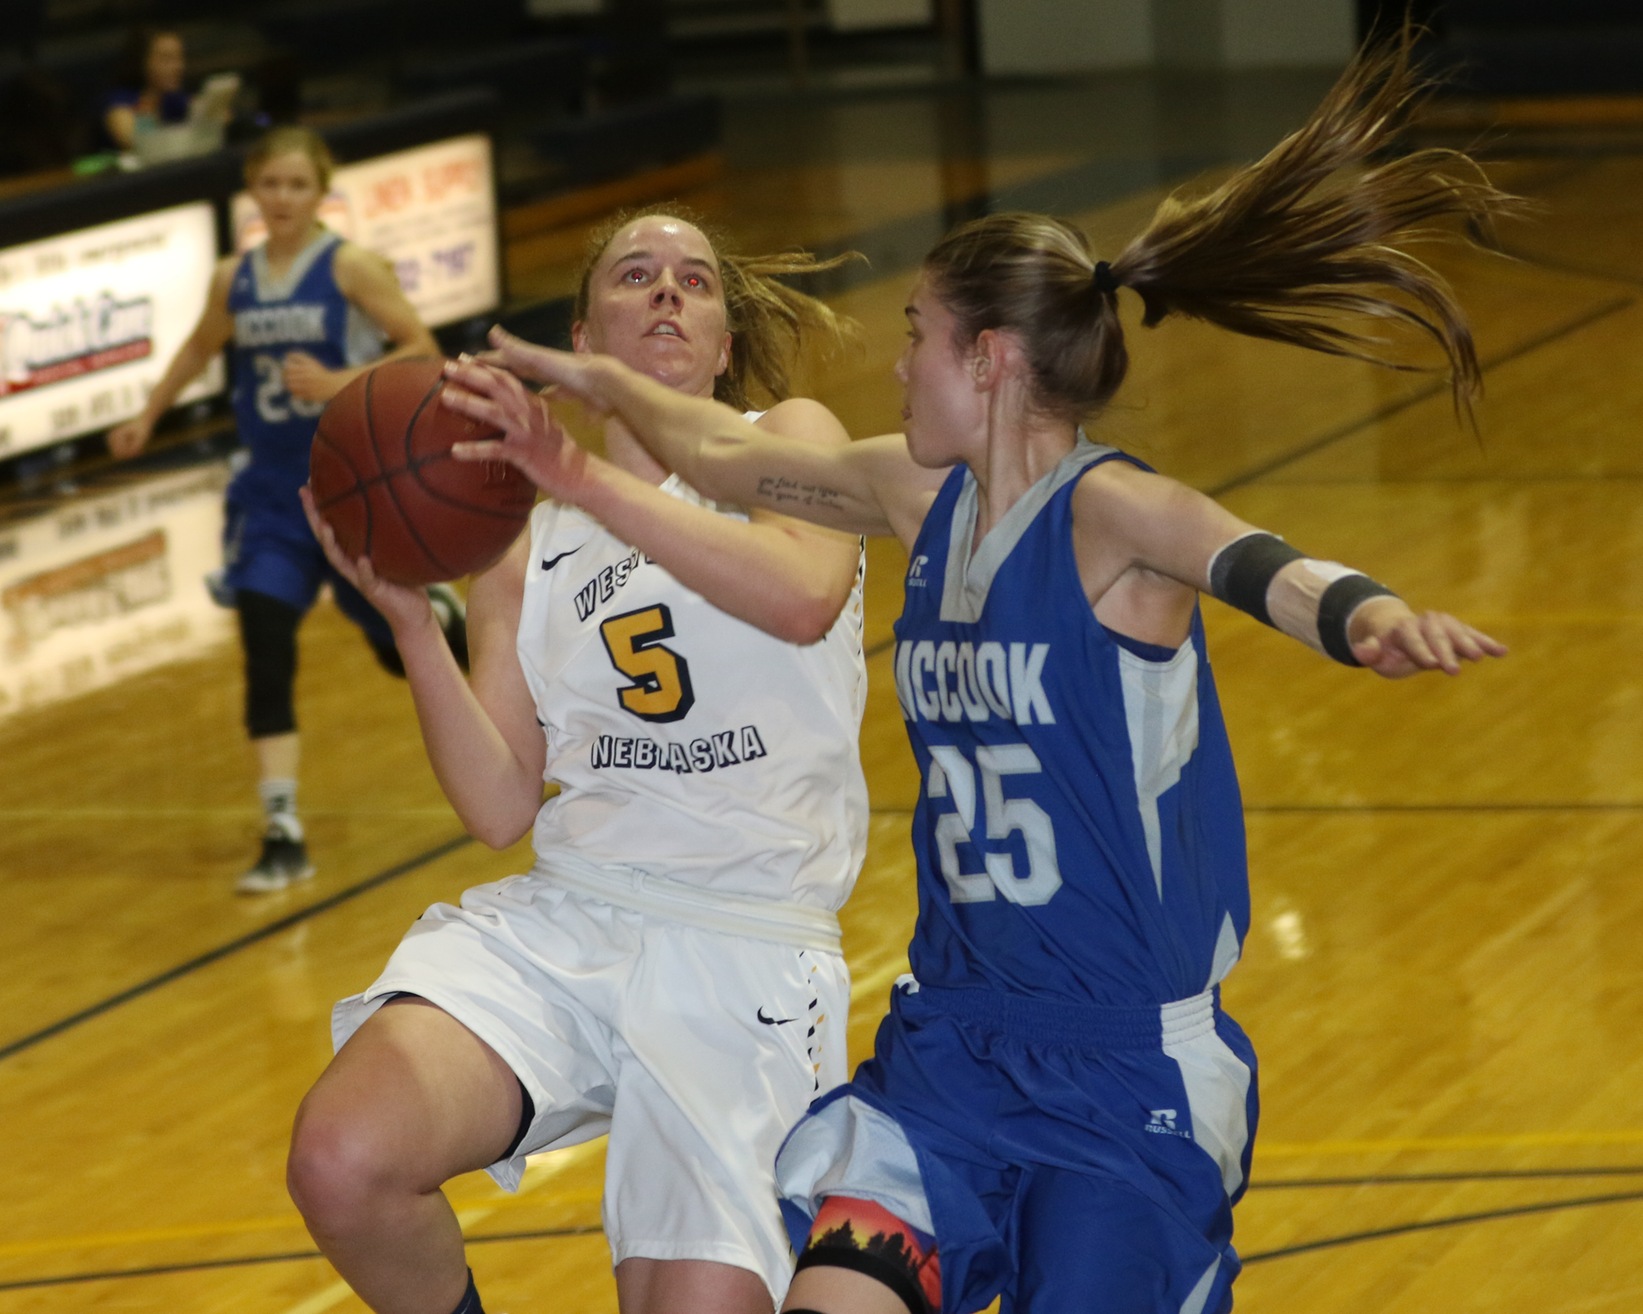 WNCC tops McCook in first round of regionals